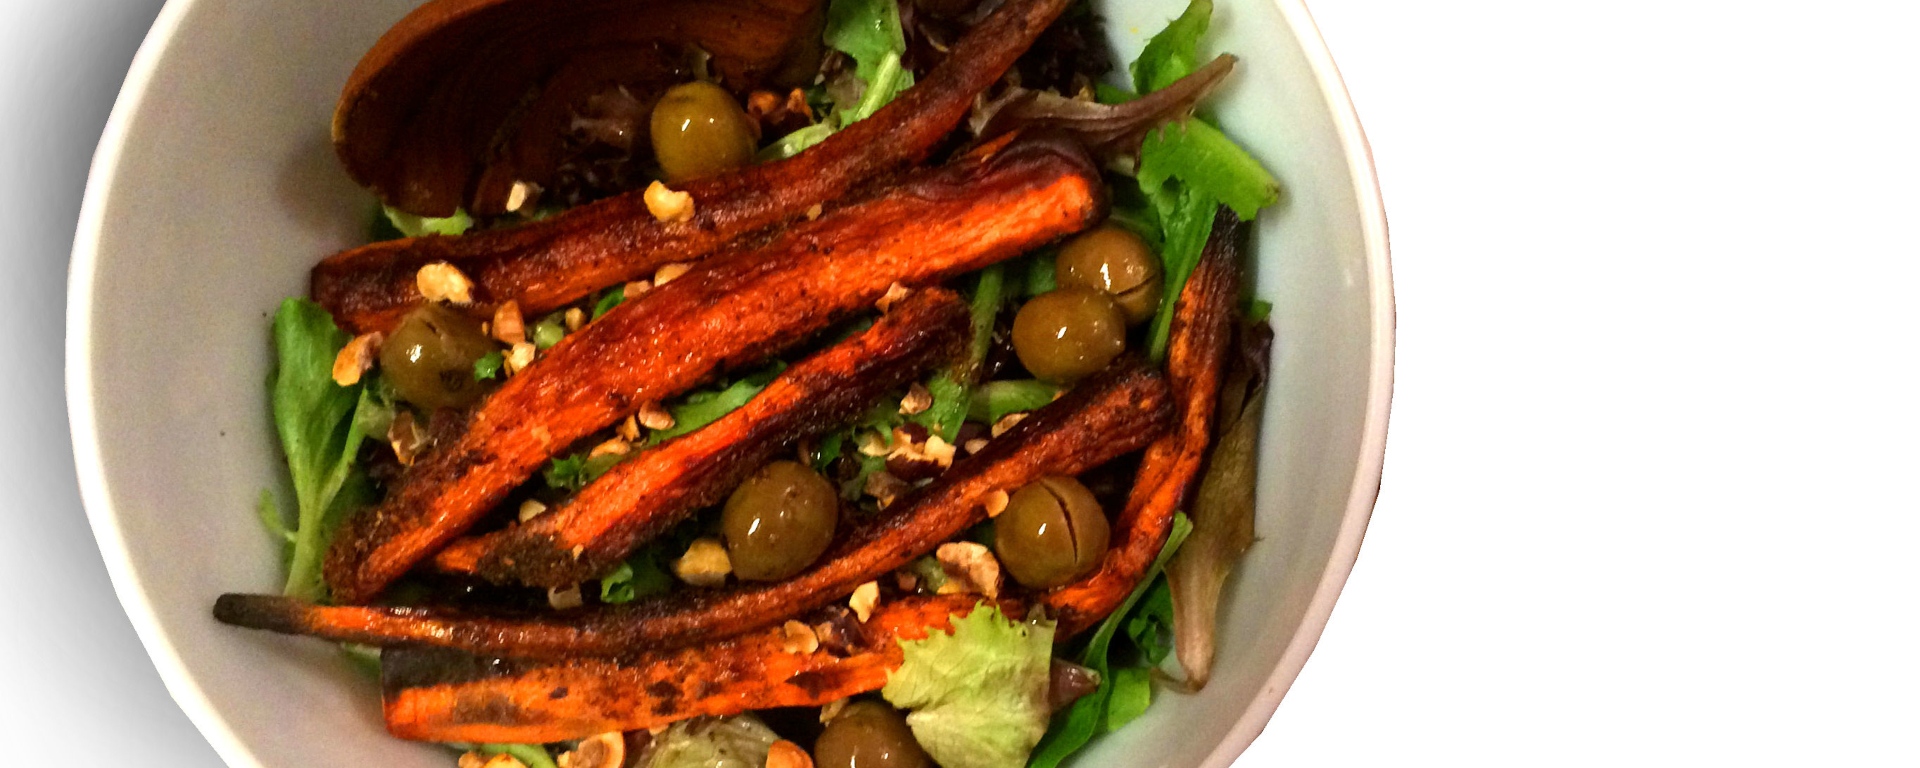 Sumac Carrot Salad with Almonds and Olives